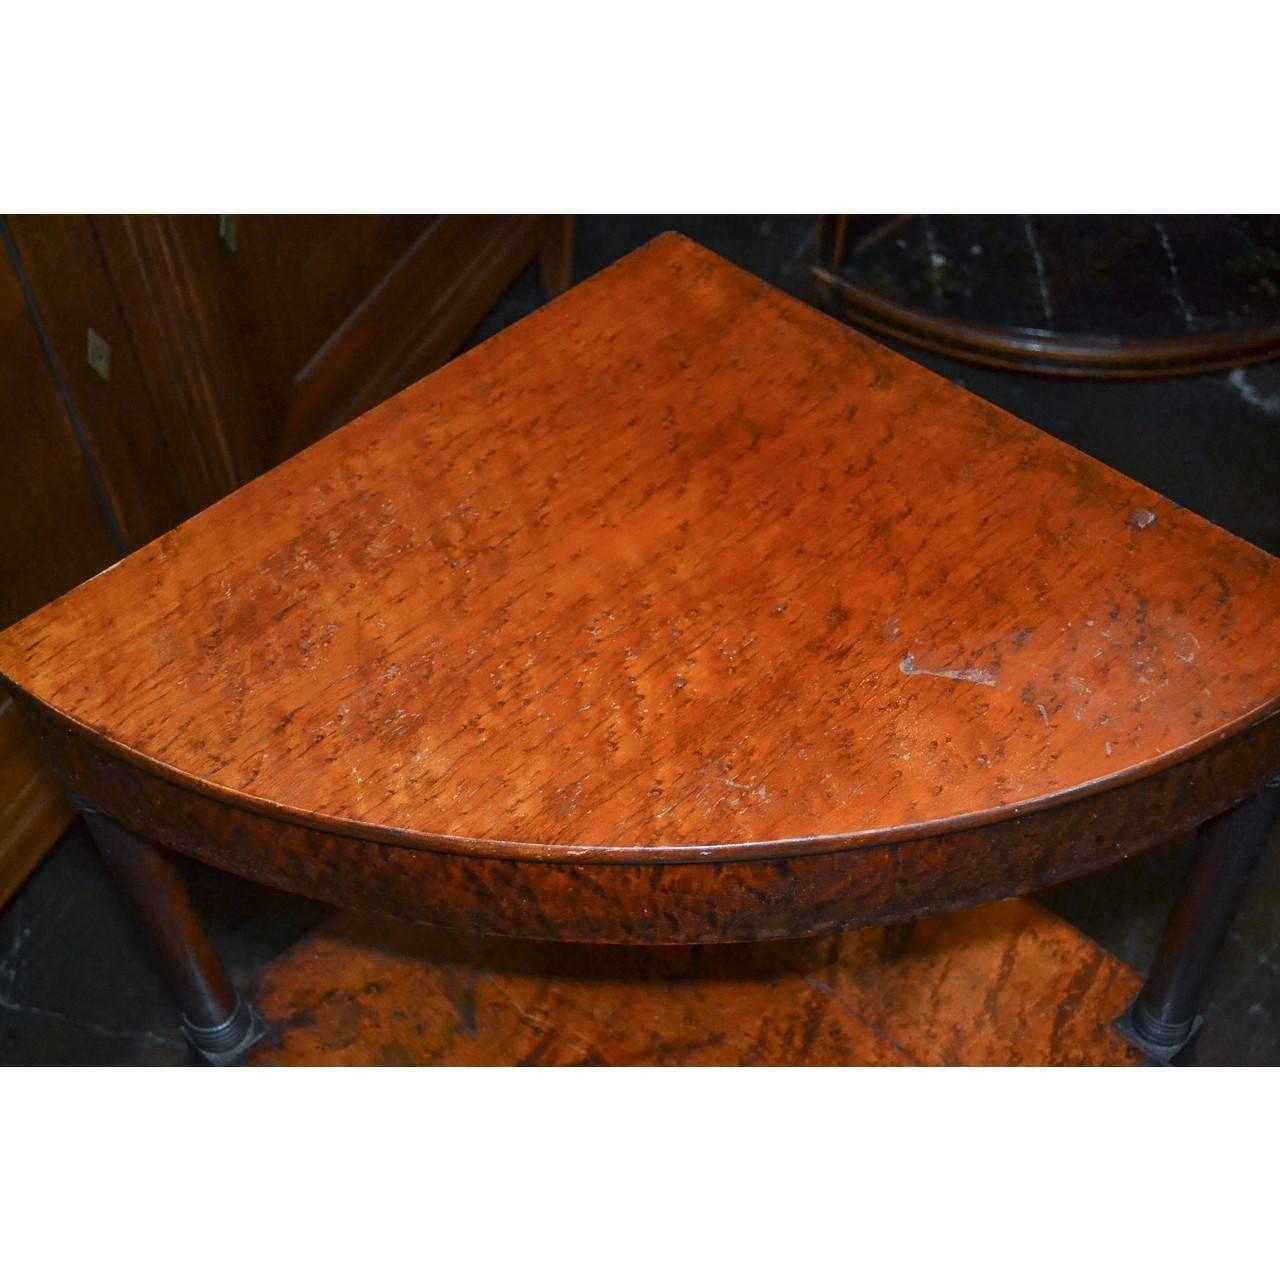 Hard to find 19th century English burl elm and mahogany corner table. Three turned columns separate the two tiers and a single drawer. The whole on tapered and reeded legs with steeple feet,

circa 1880.